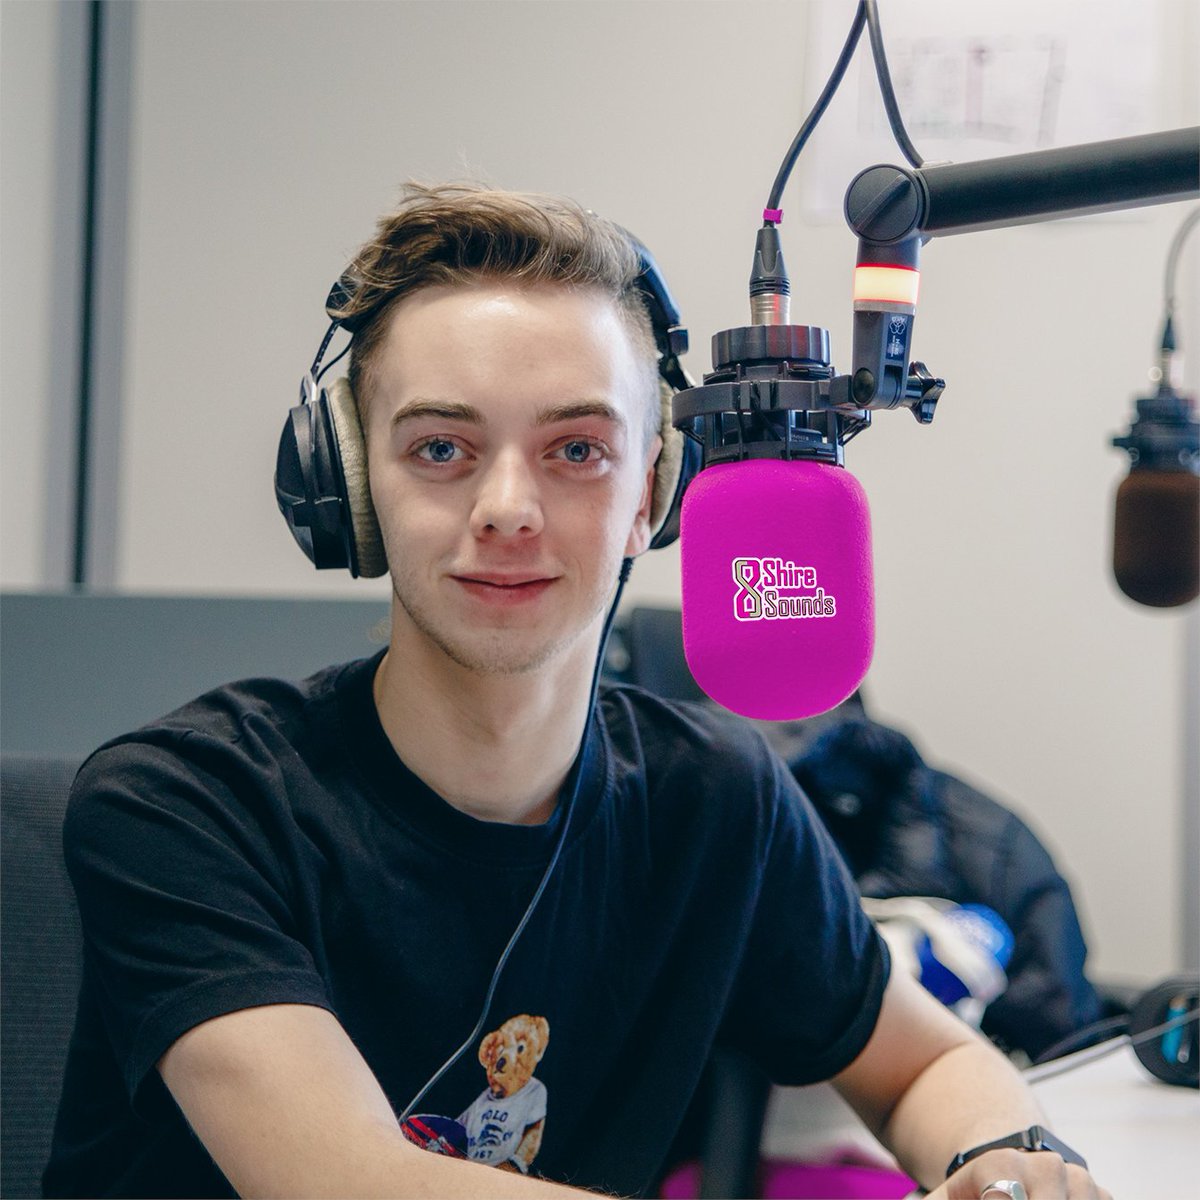 Morning, It's George in for Charlie on breakfast! Join me now, as I'm about to get this week's Song in Reverse underway ⏪ Listen right now on: 📱- shiresoundsradio.co.uk/player 🗣- Ask Alexa To 'Play Shire Sounds Radio”